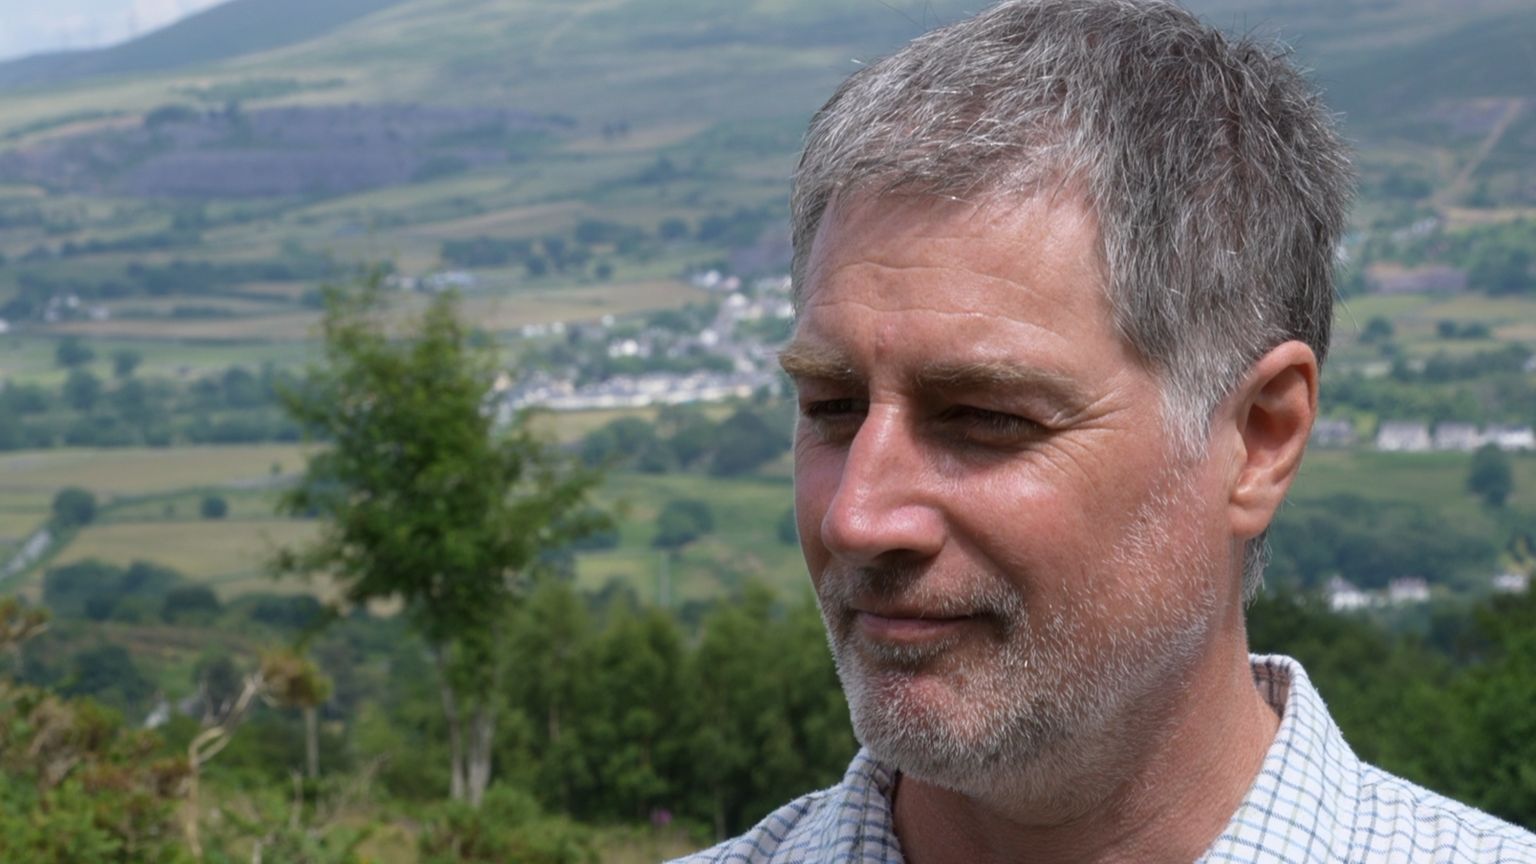 Head shot of Dr Craig Shuttleworth, outside, wearing pale checked shirt, with hillside and greenery in background